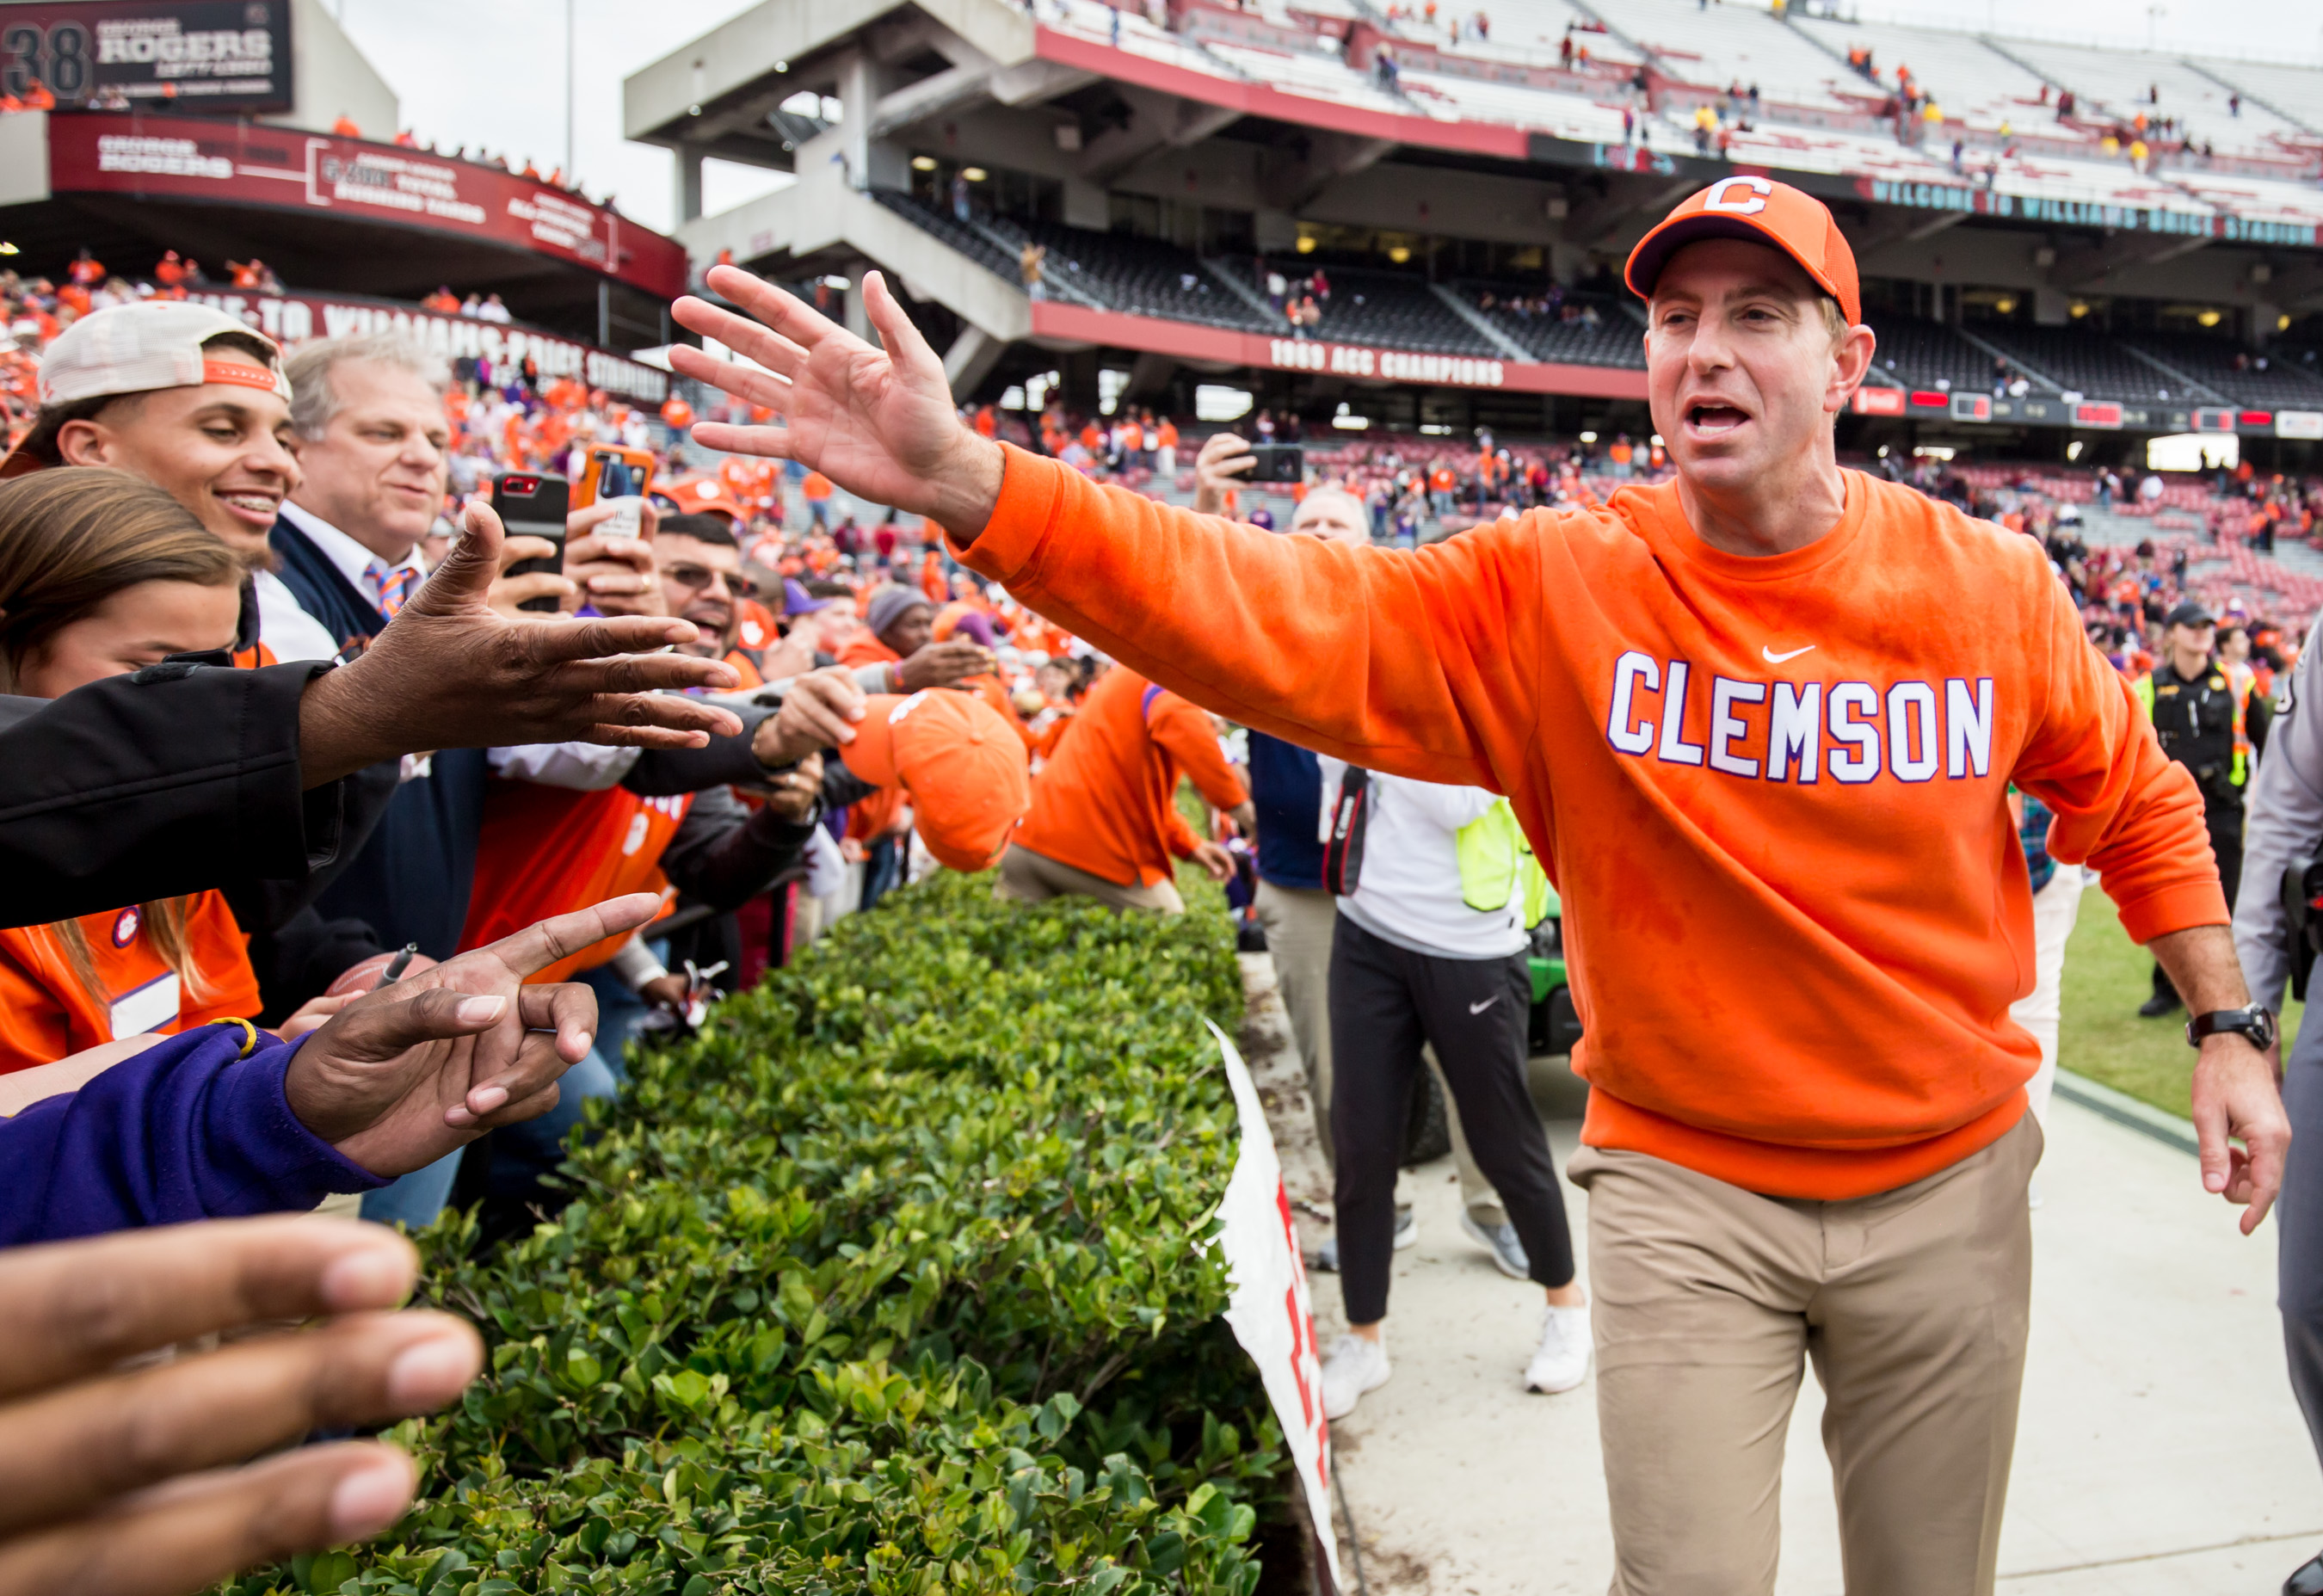 Where does Clemson's 2023 schedule rank among ACC teams?